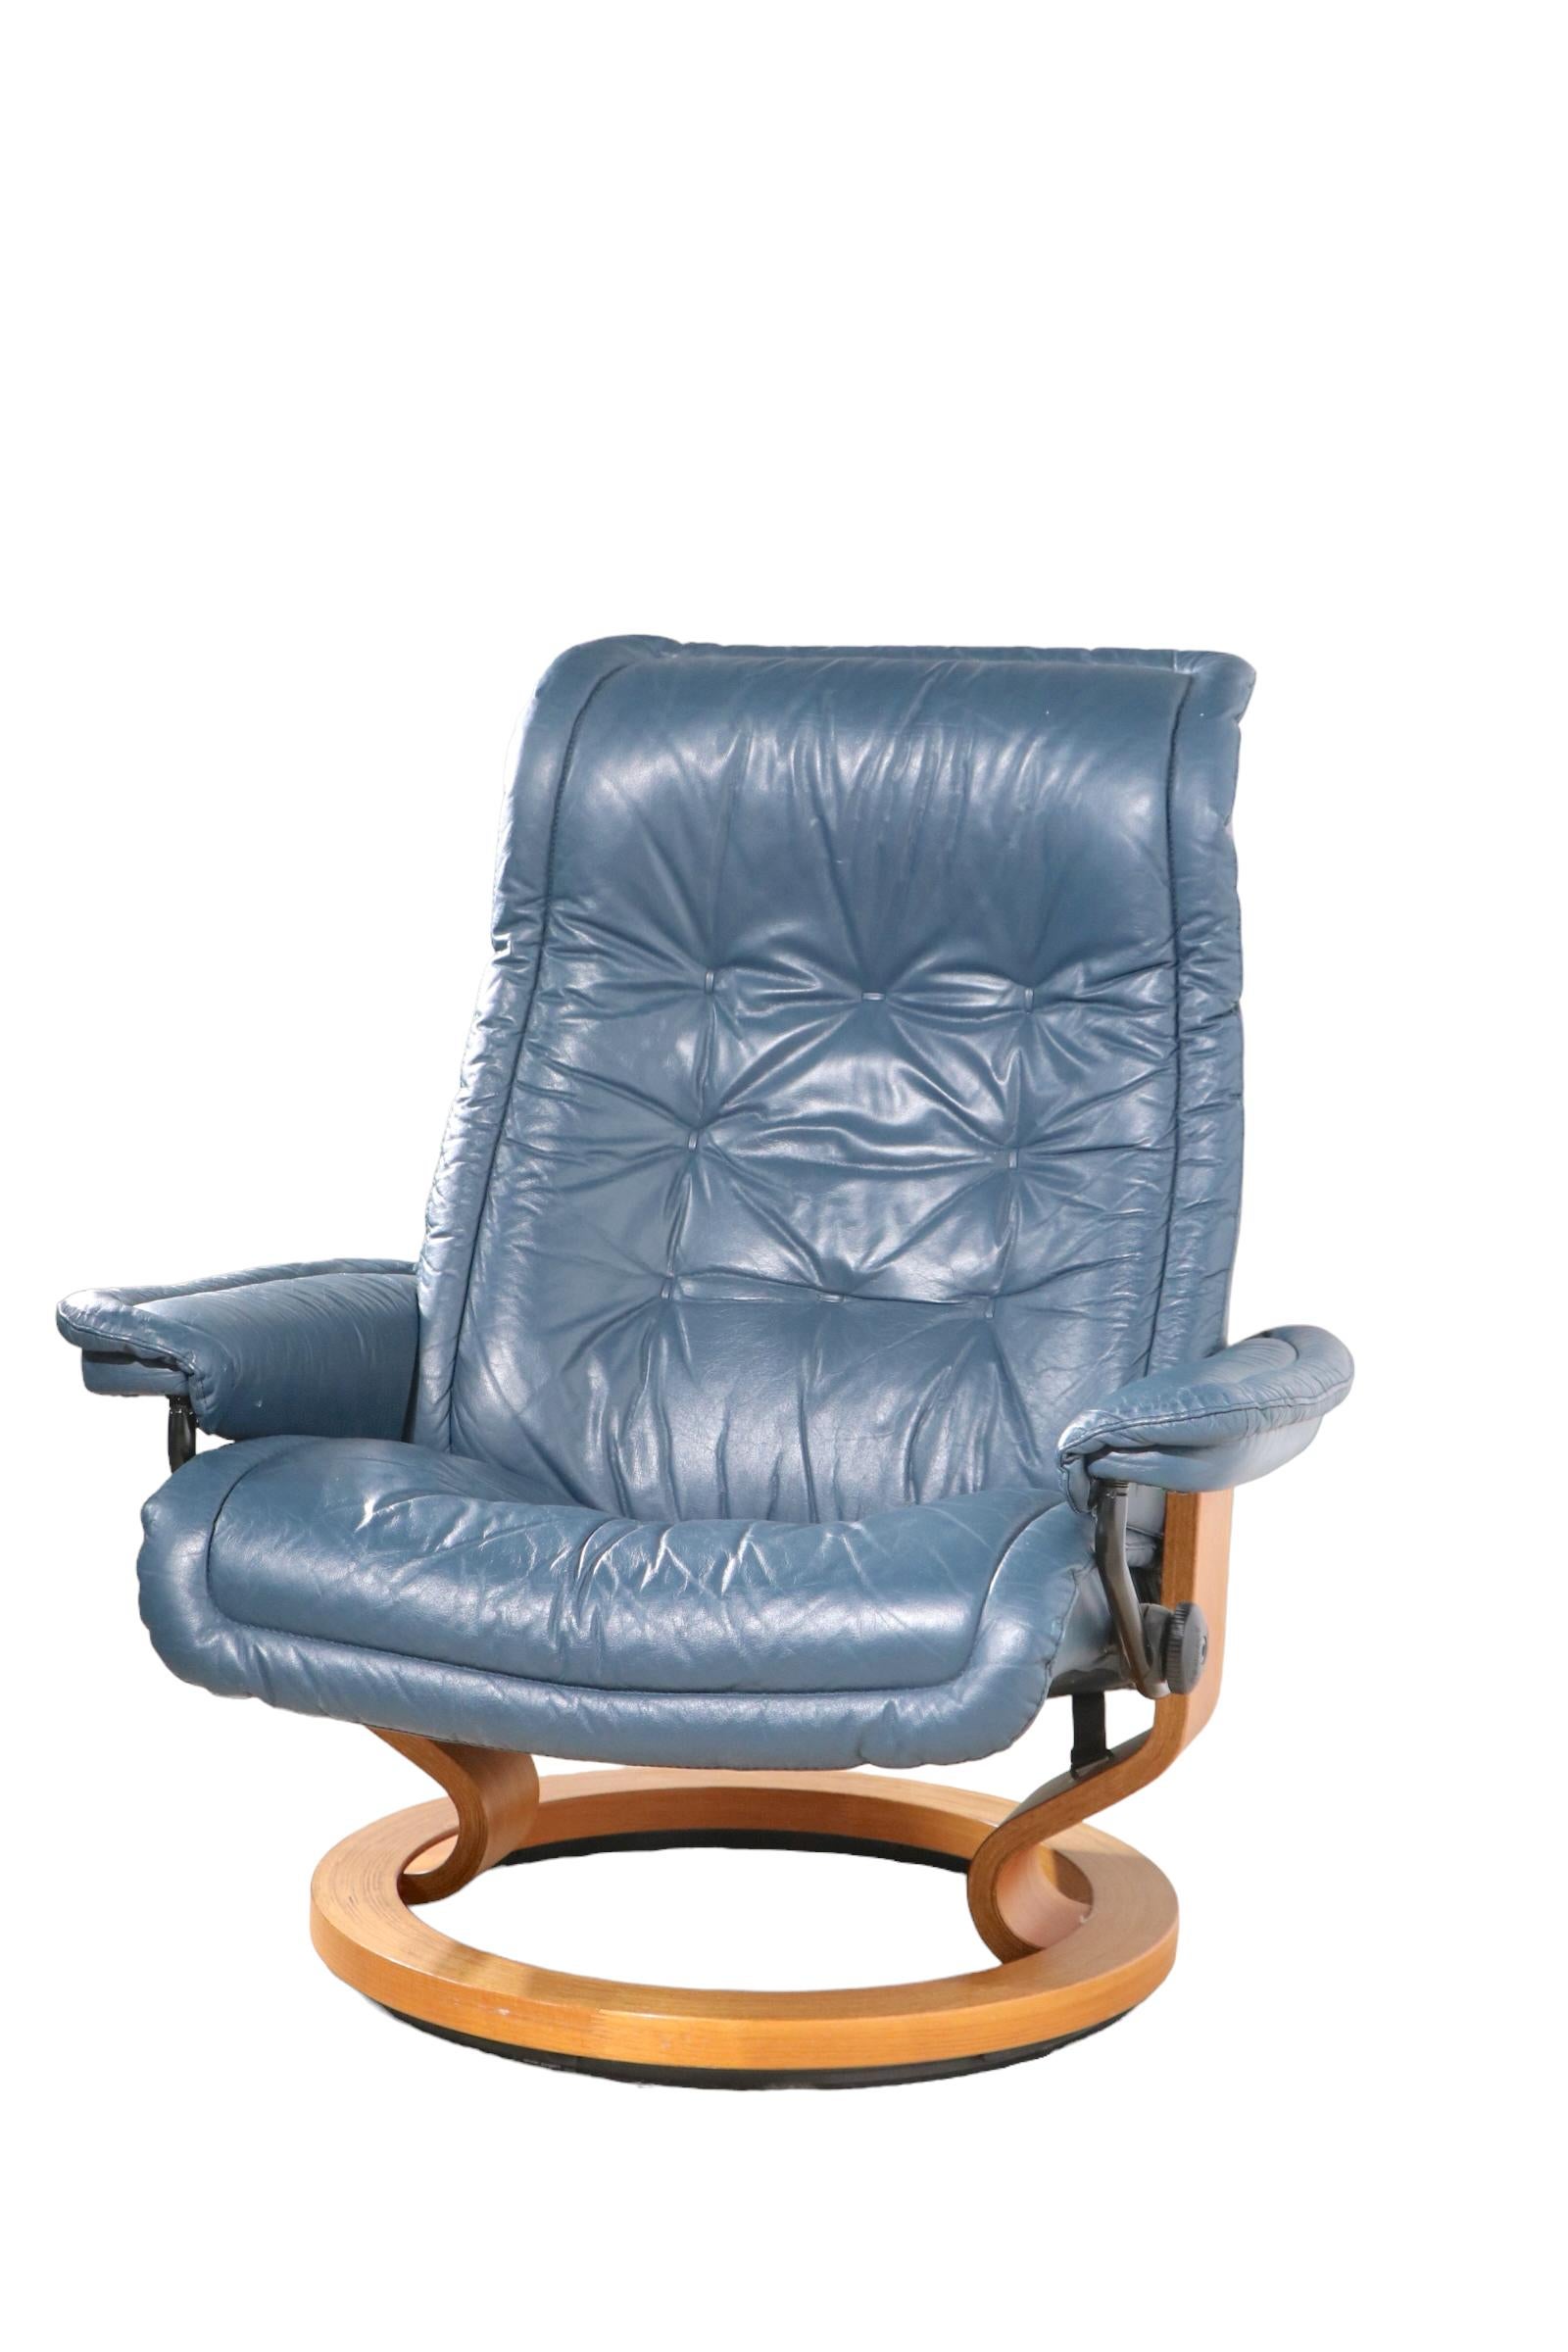 Ekornes Stressless Reclining Lounge Chair with matching Ottoman Made in Norway  6